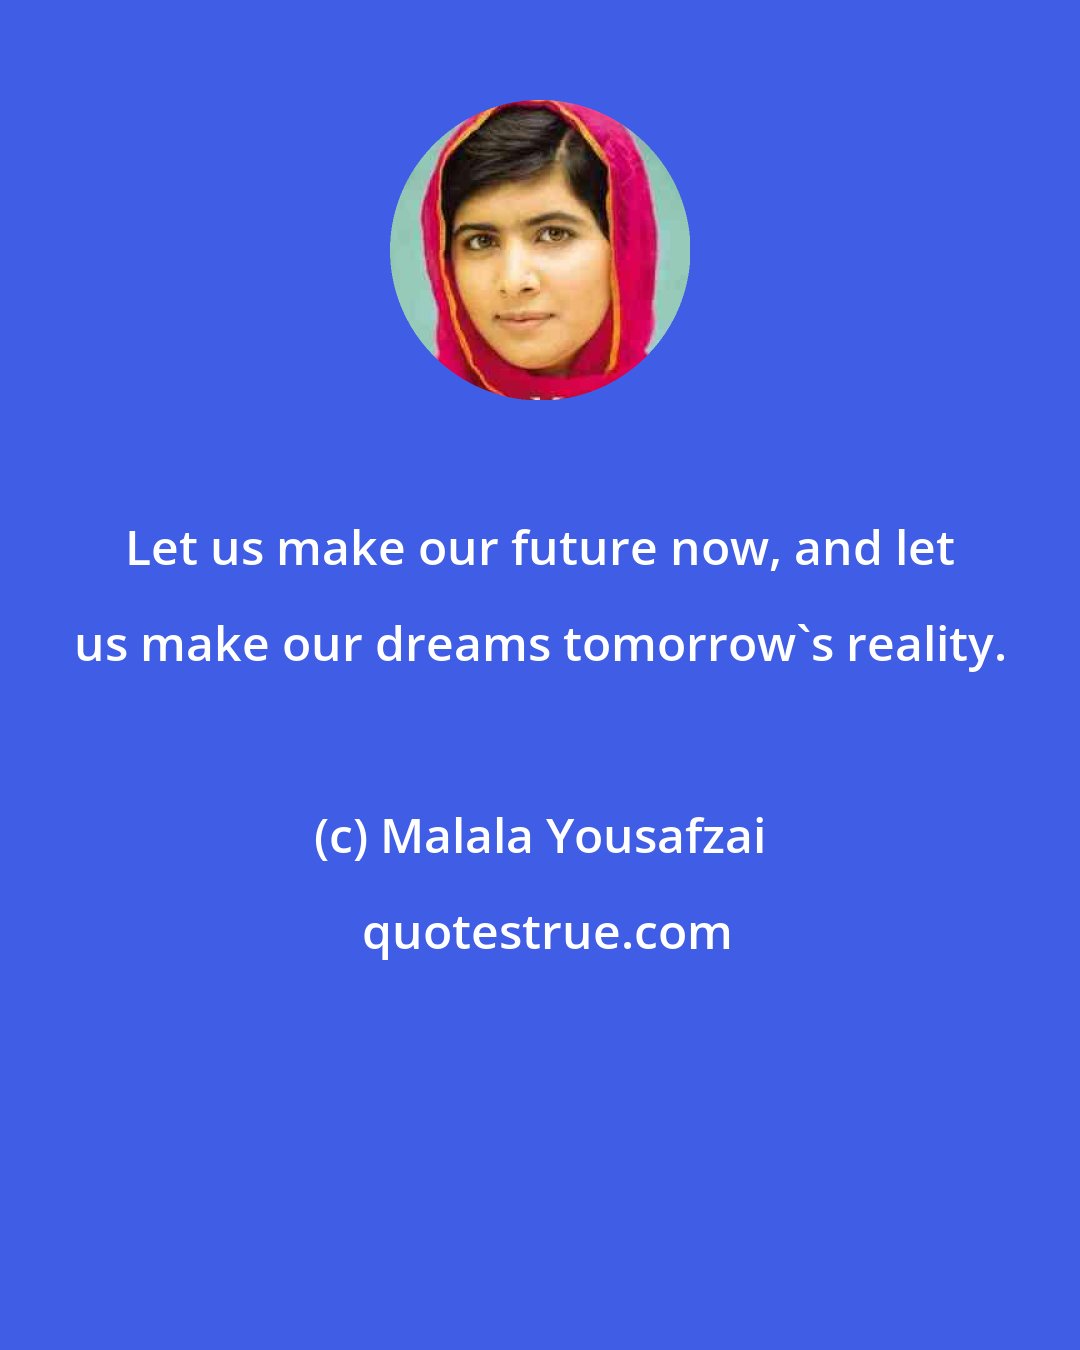 Malala Yousafzai: Let us make our future now, and let us make our dreams tomorrow's reality.